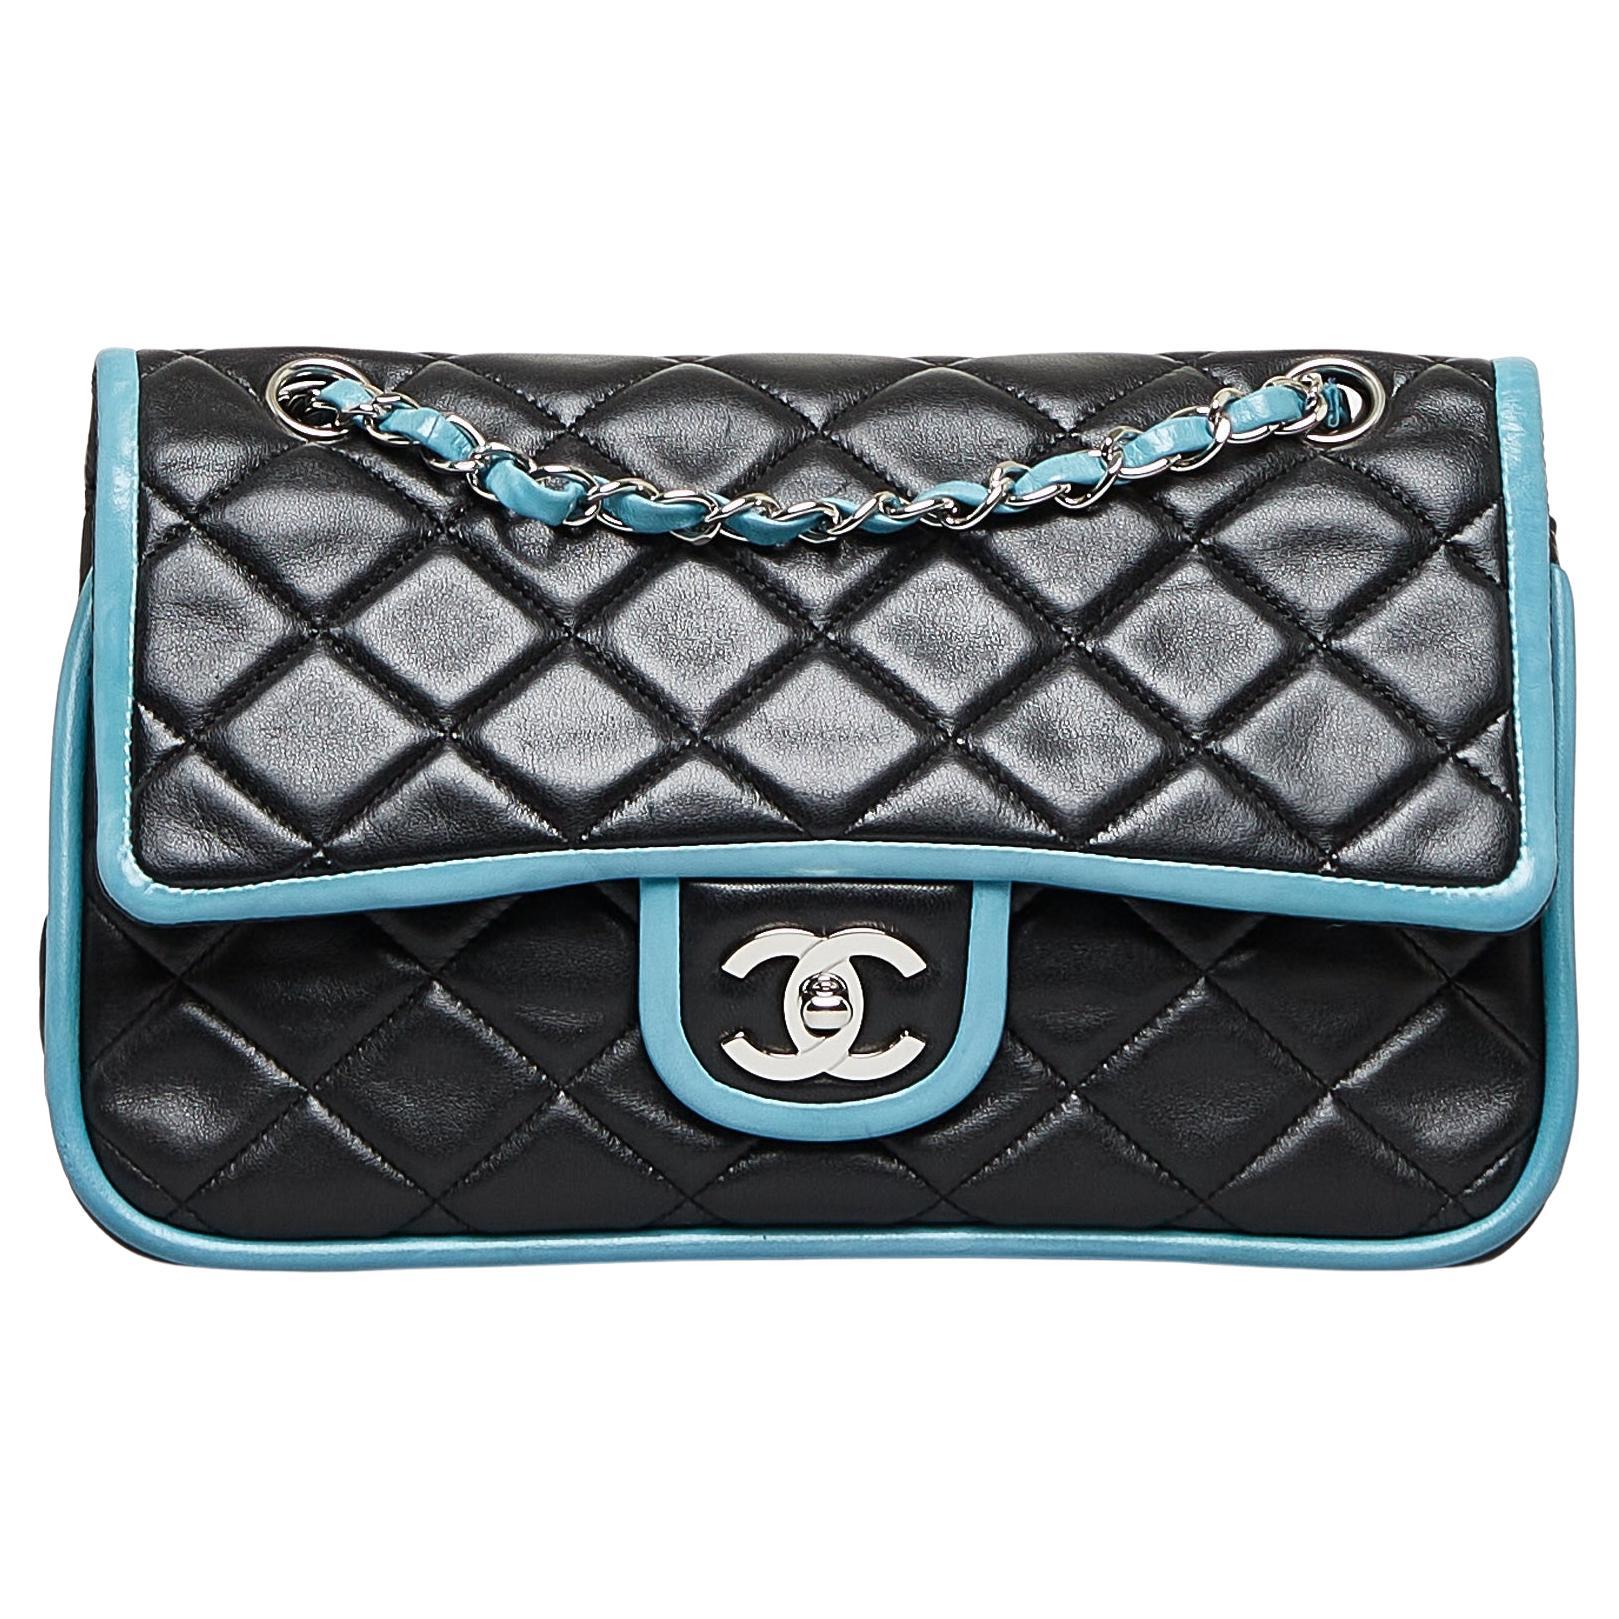 Women's Chanel 2006 Medium Double Classic Flap in Black Lambskin Turquoise Piping Bag